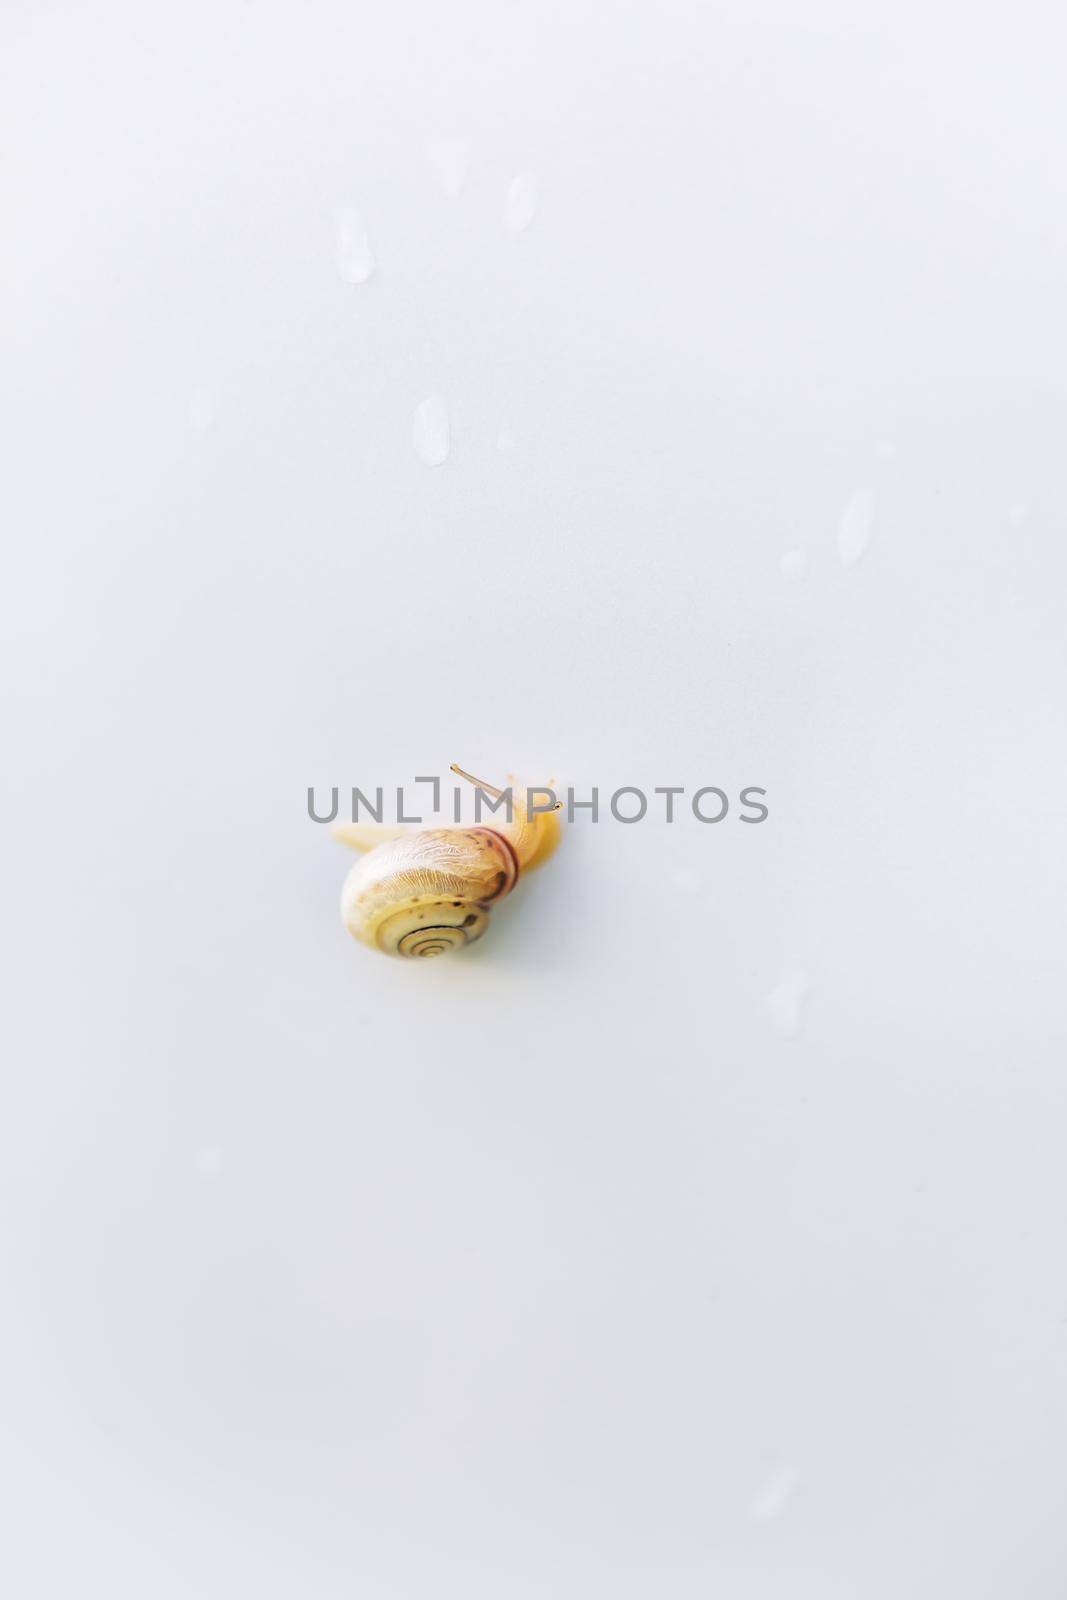 A snail crawls on a white table after the rain. Snails with brown shells and antennae. Snail with horns and brown spiral shell. Close-up